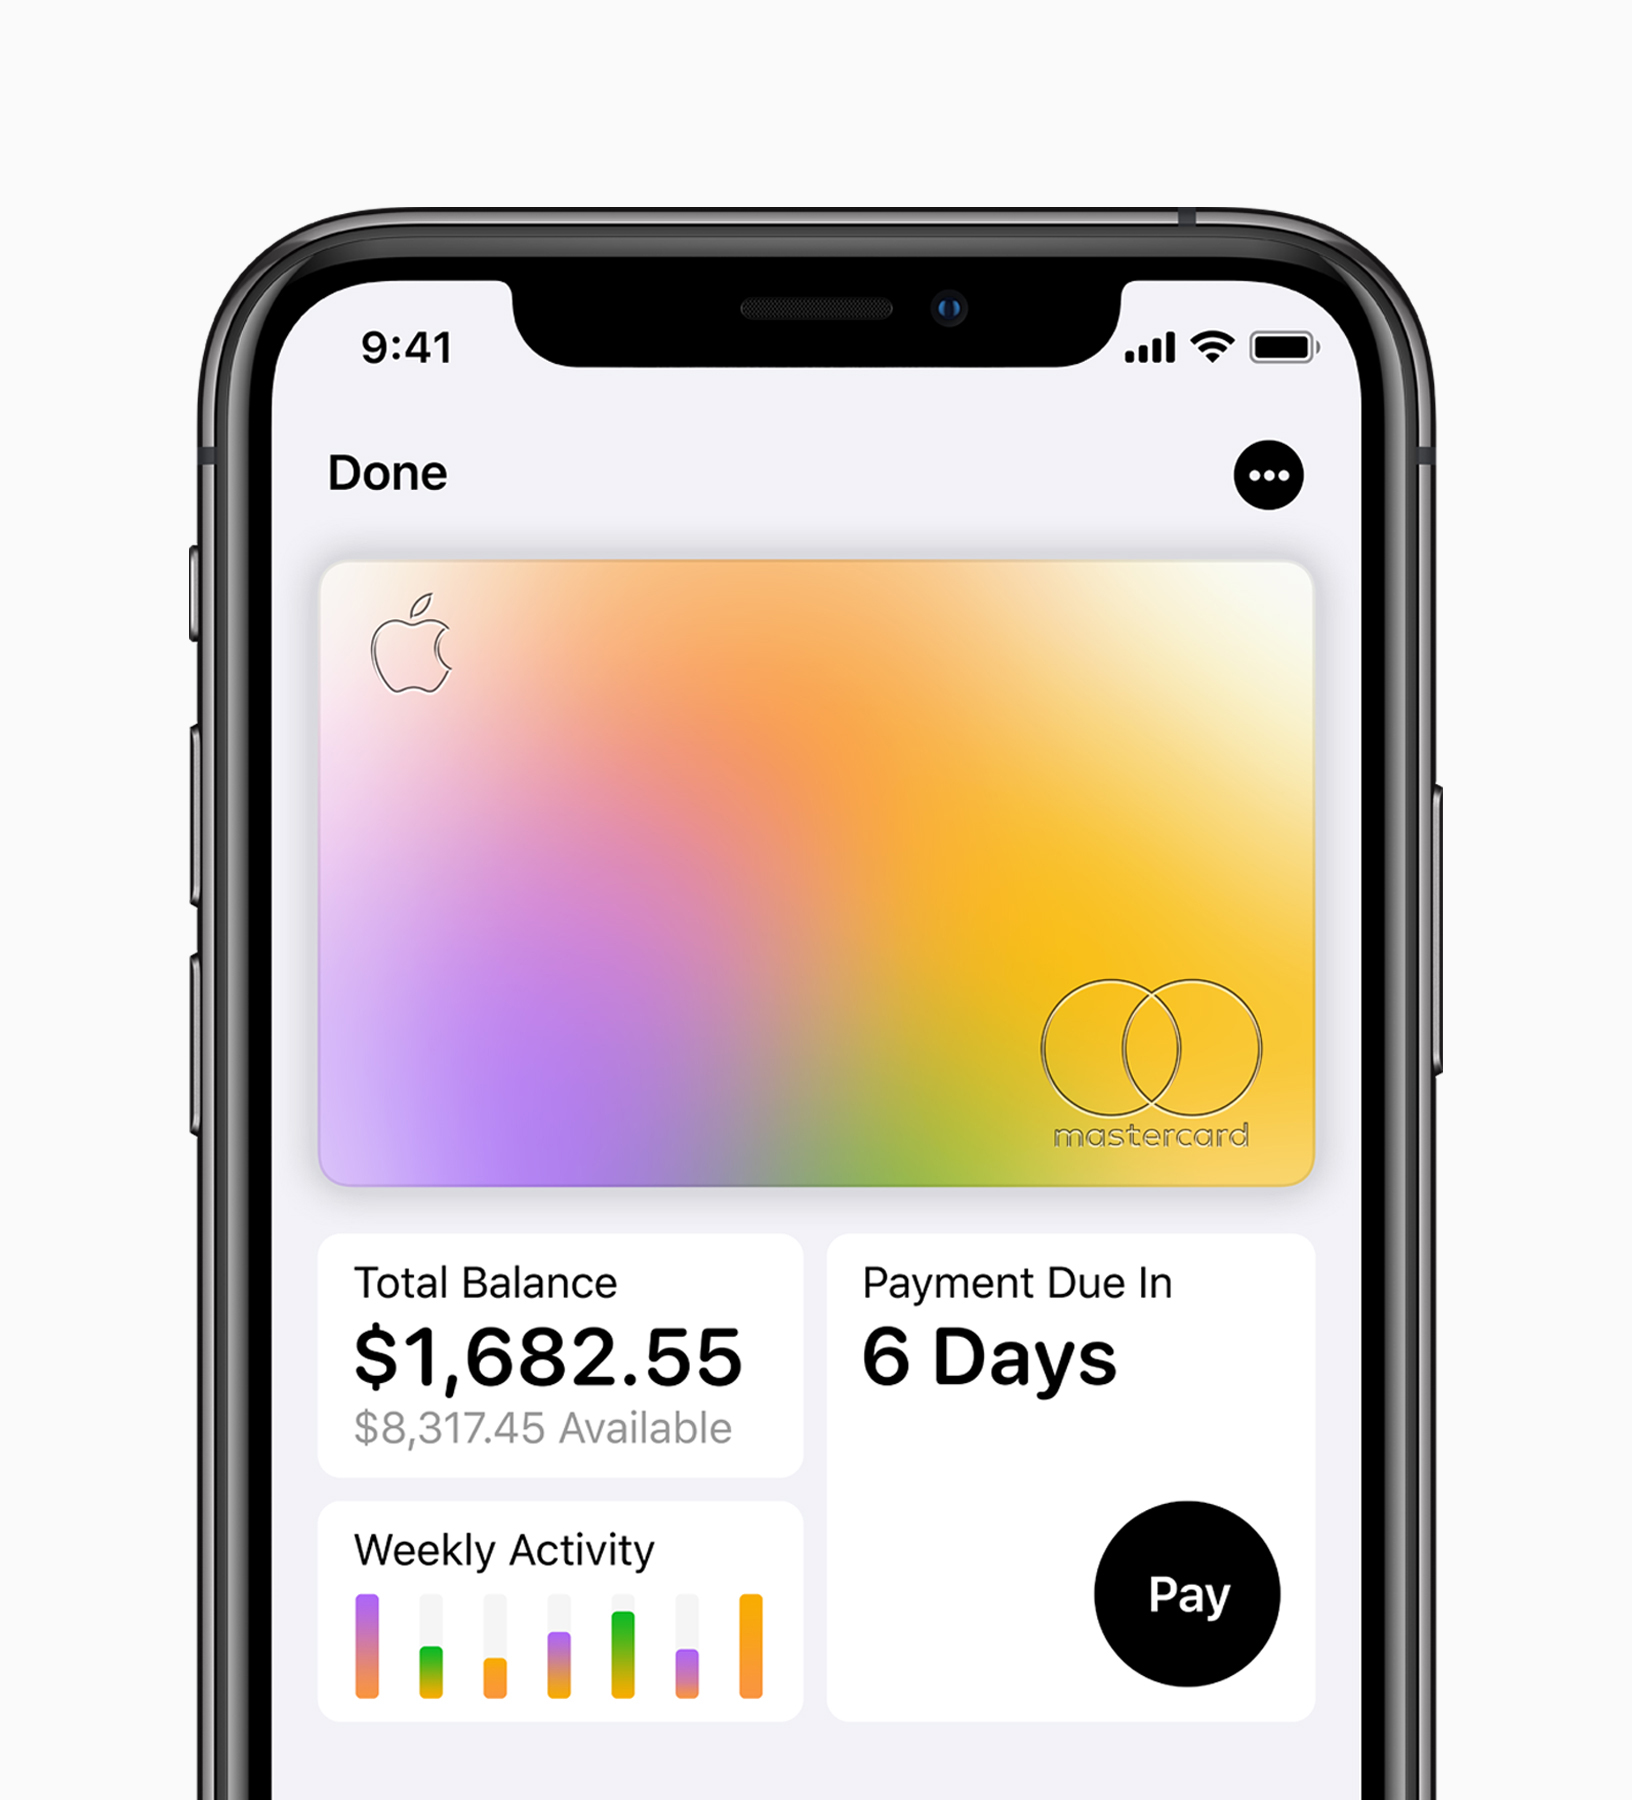 the-apple-cards-big-selling-point-will-likely-be-its-apple-pay-and-apple-wallet-integrations-along.jpeg